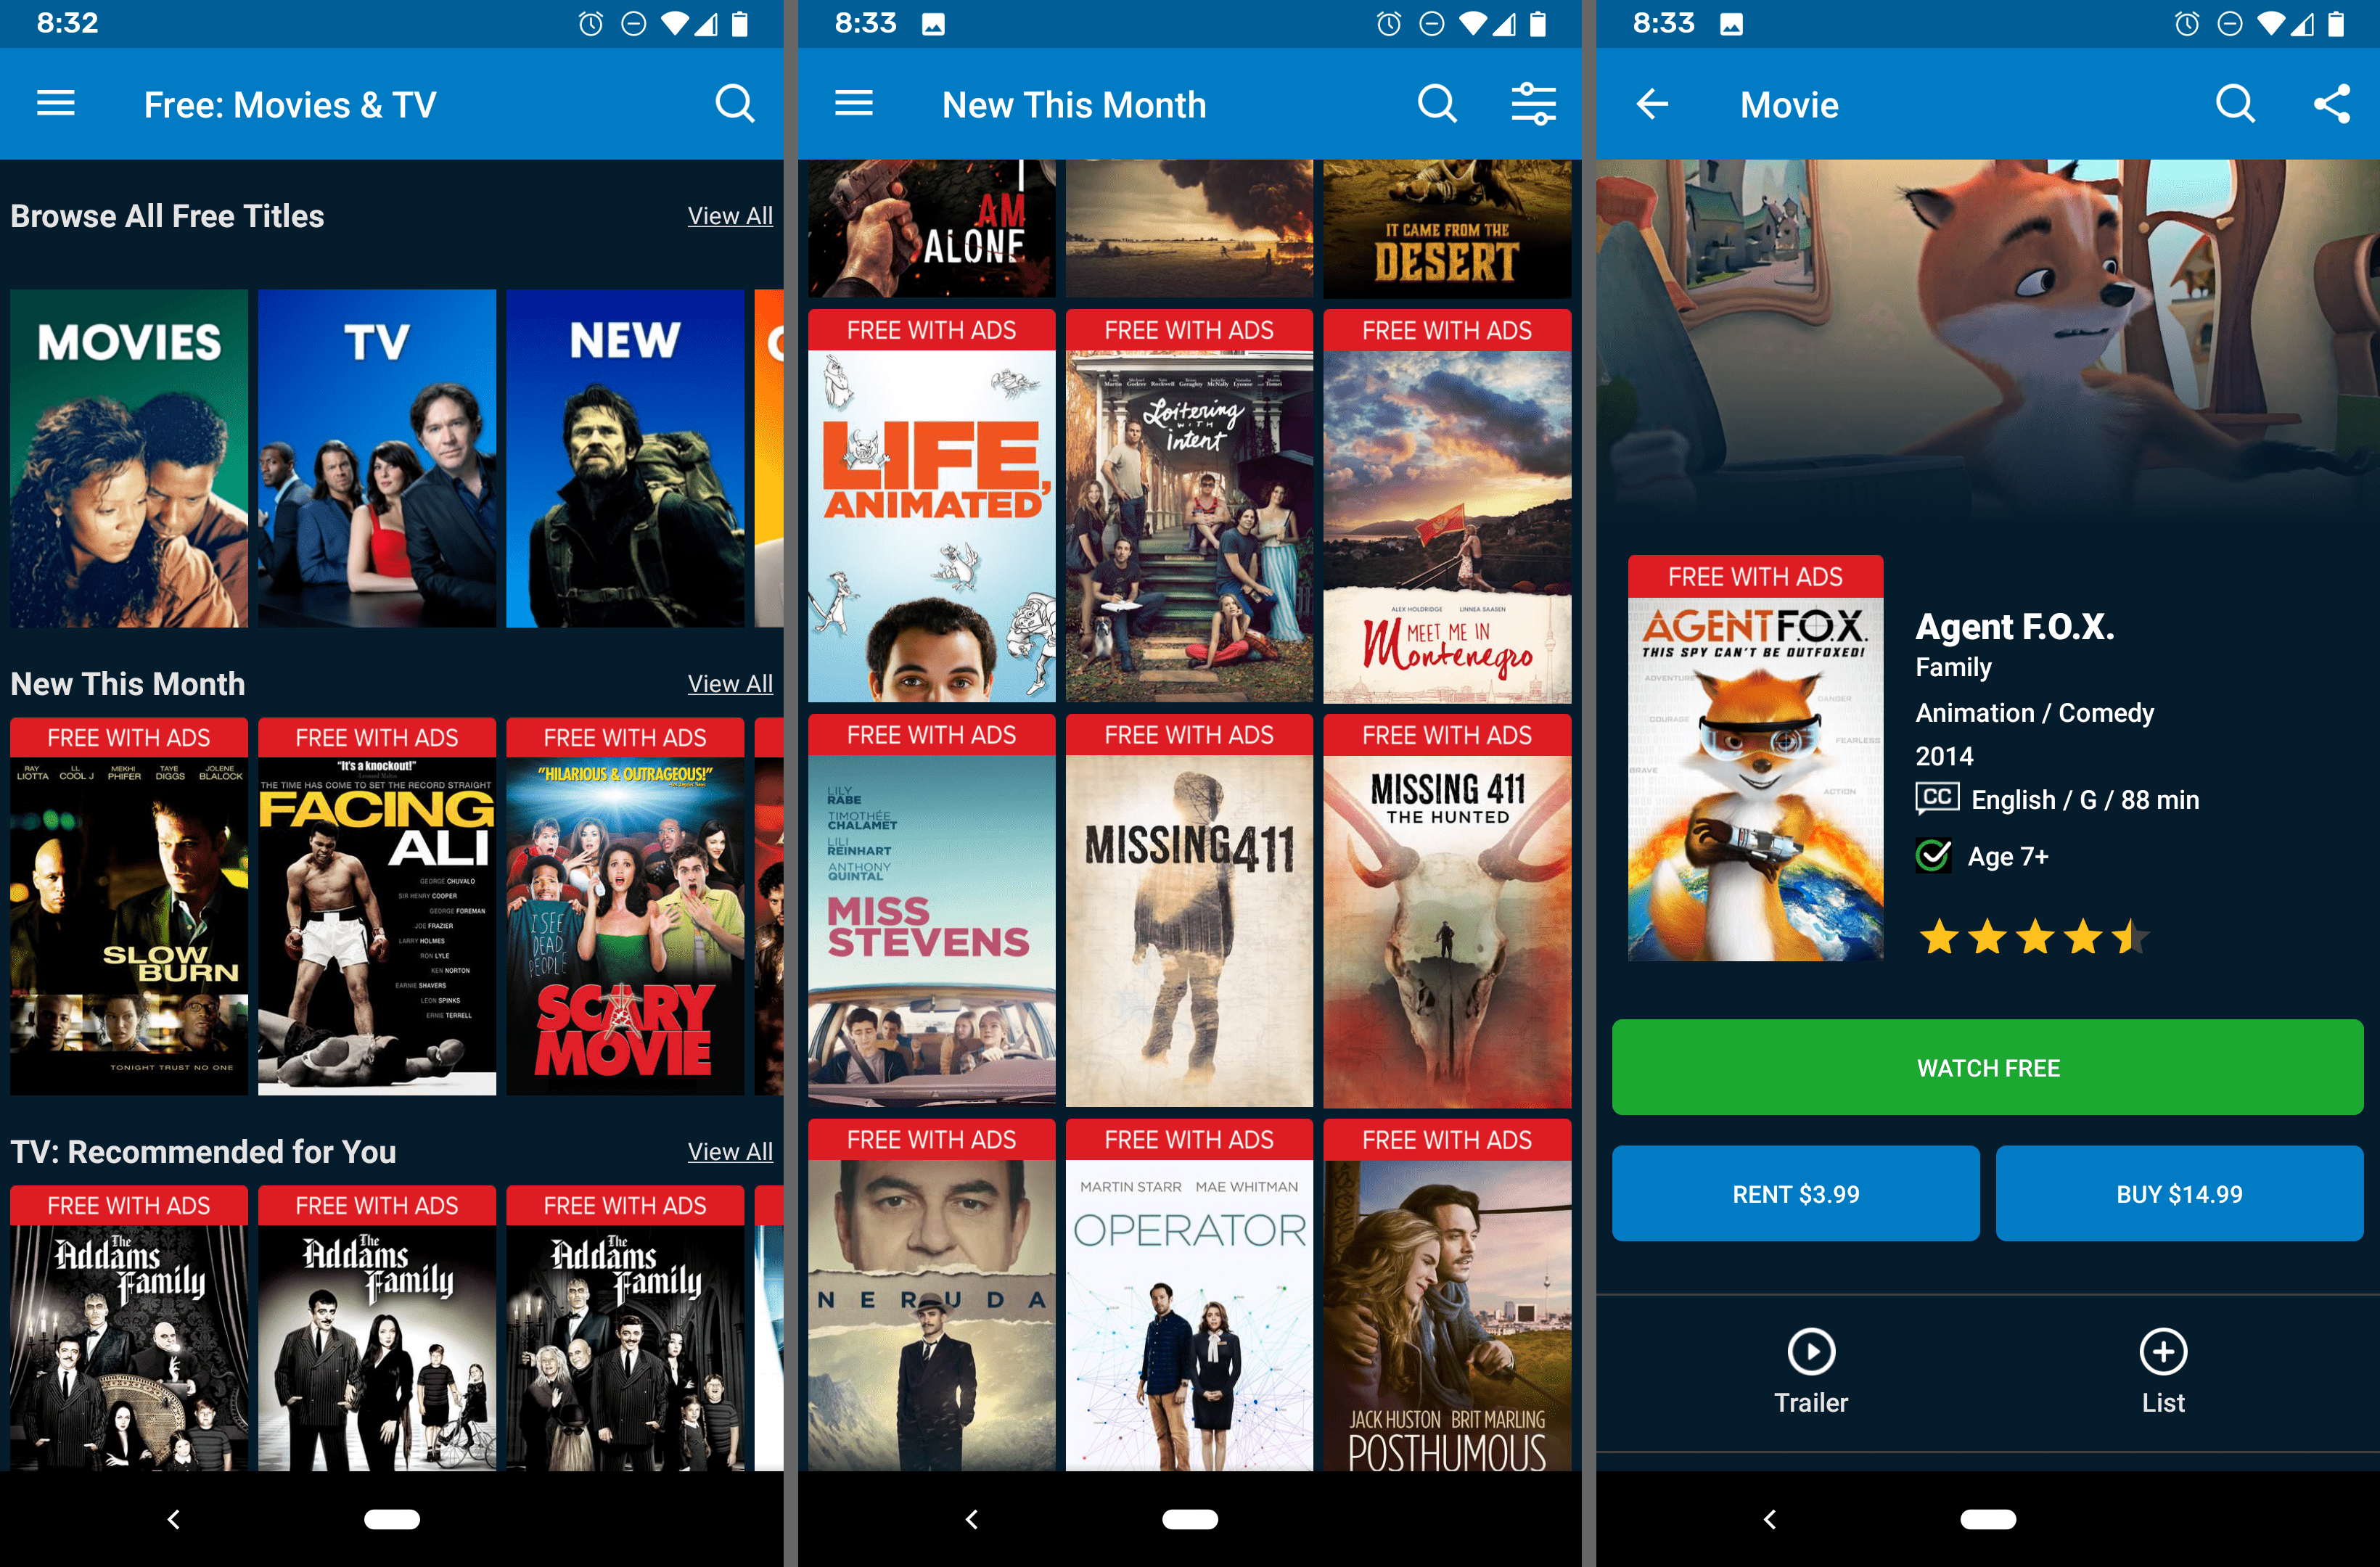 free movie download apps for android